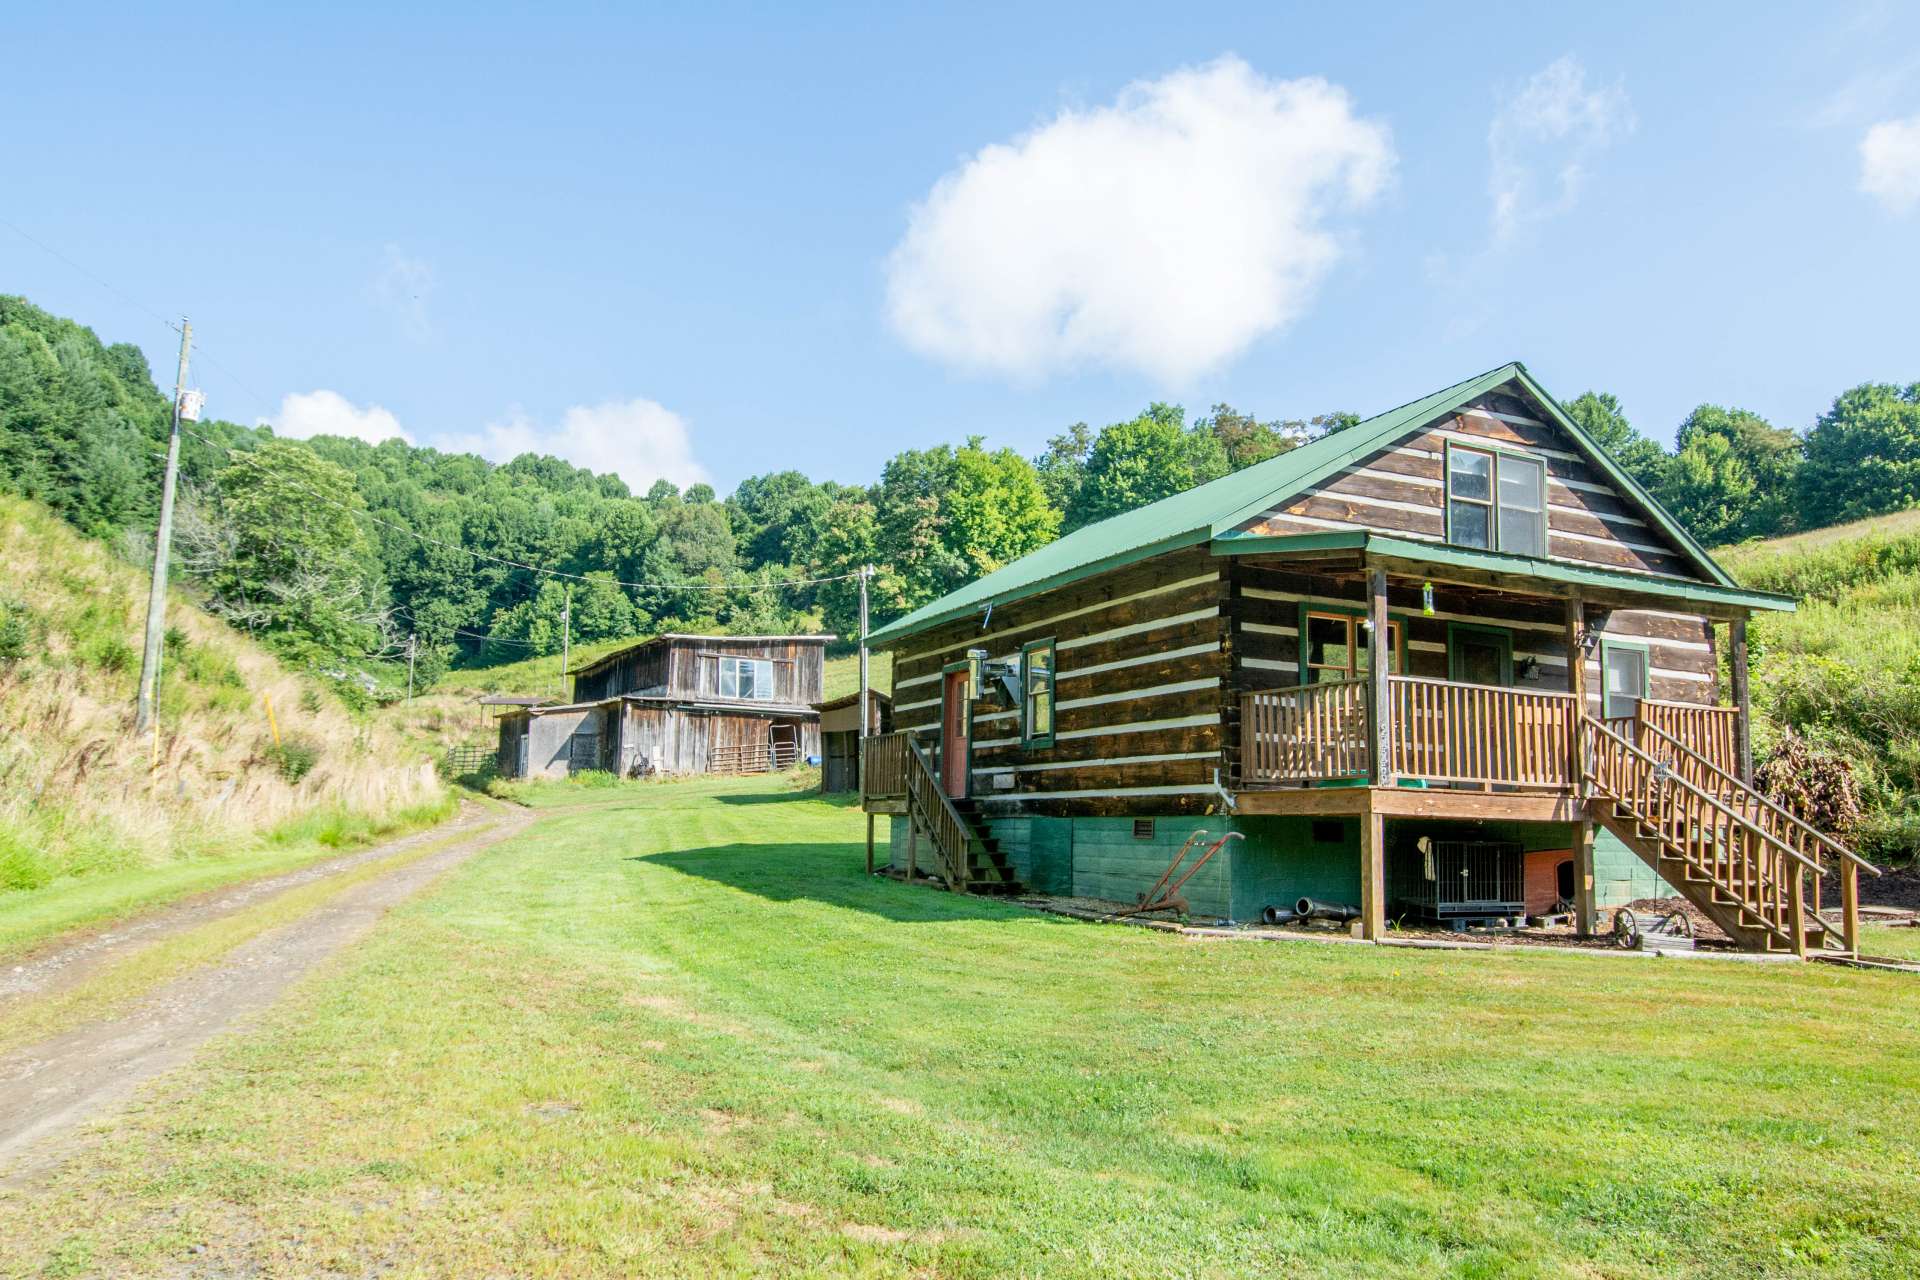 The cabin sits on a peaceful acre setting with an additional 14+ acres of pasture land and a barn available.